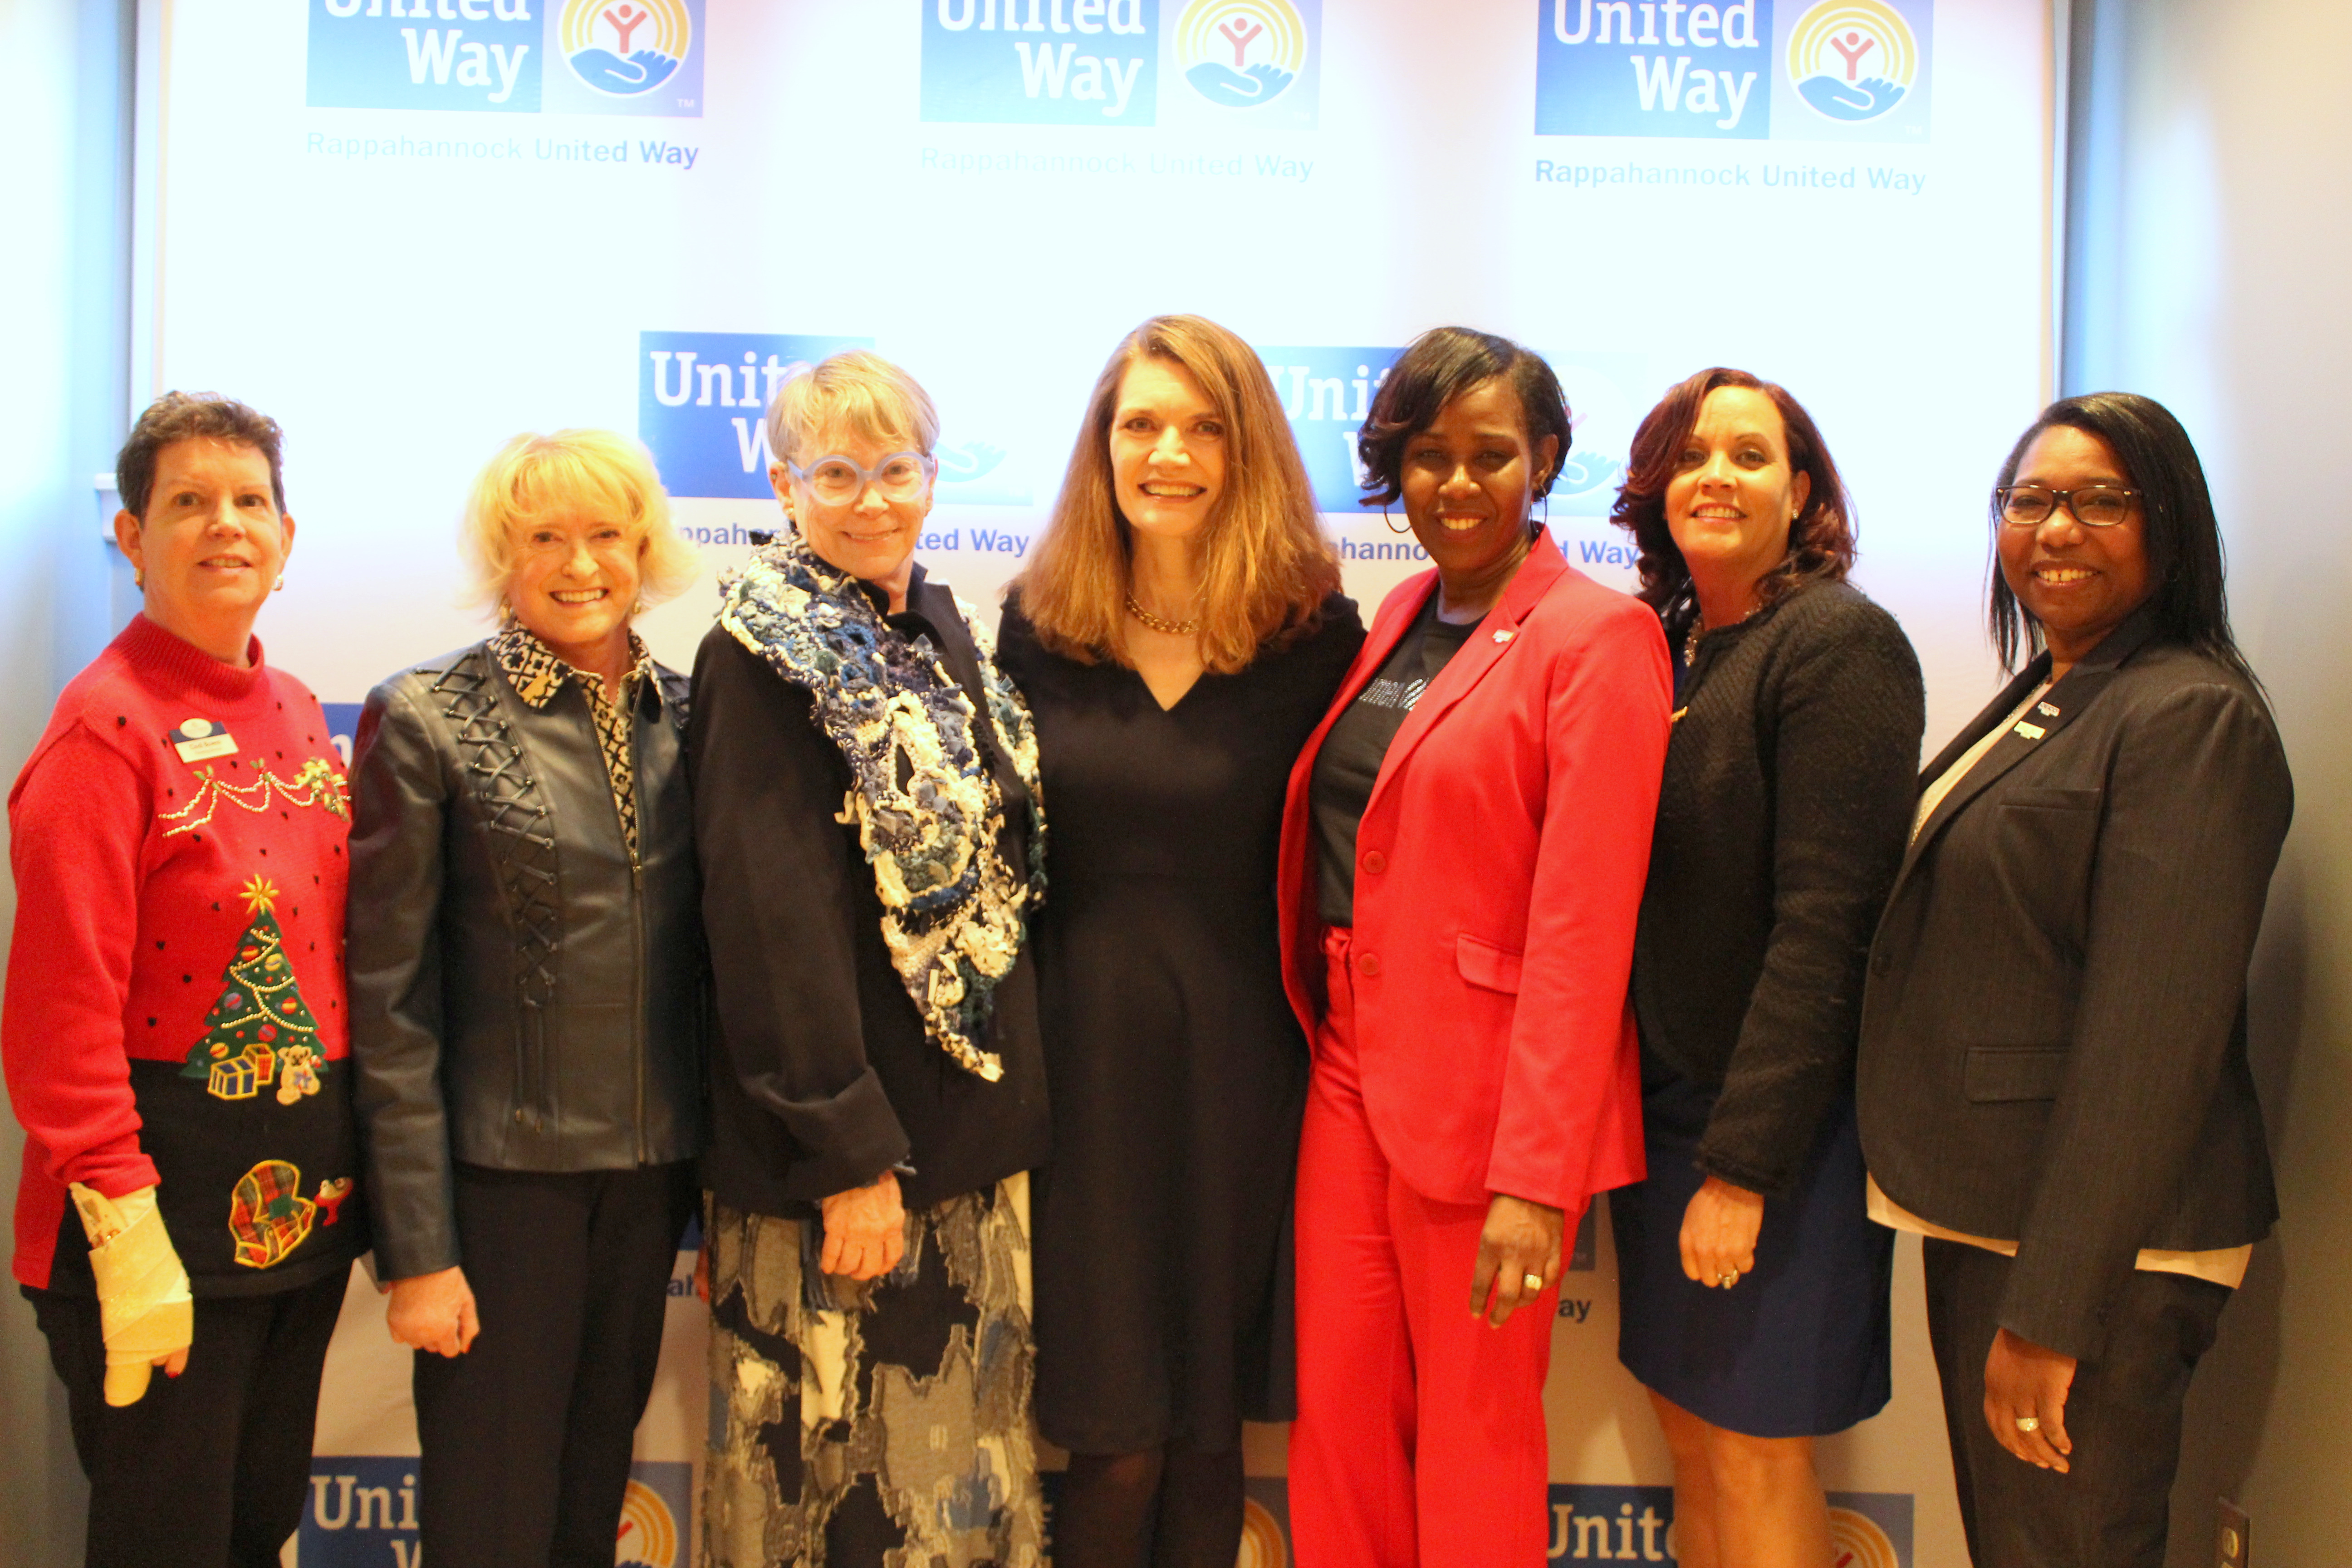 Author Jeanette Walls poses with members of the Rappahannock United Way leadership council